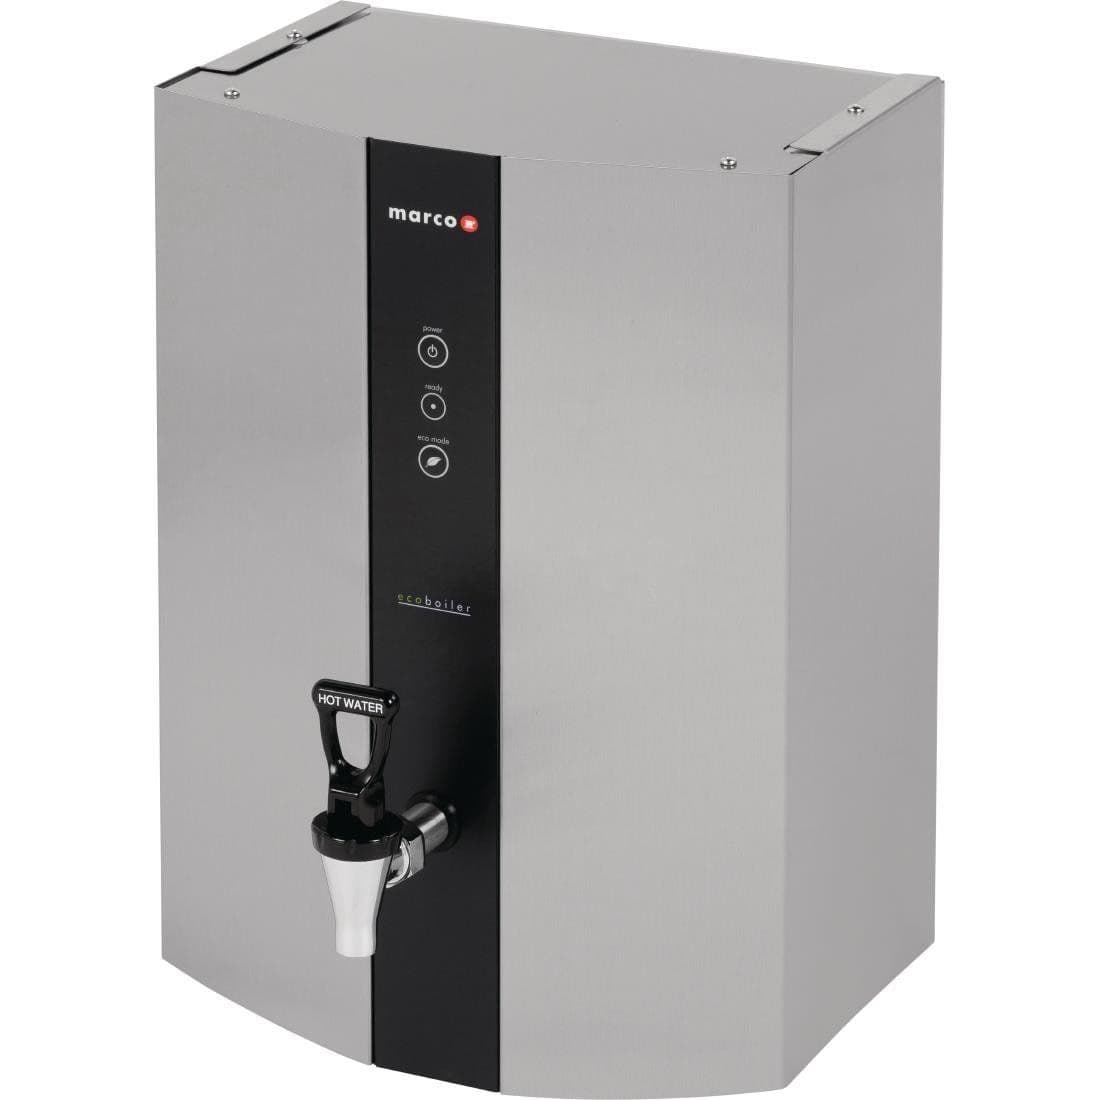 GL425 Marco Wall Mounted Water Boiler Ecoboiler WMT5 JD Catering Equipment Solutions Ltd